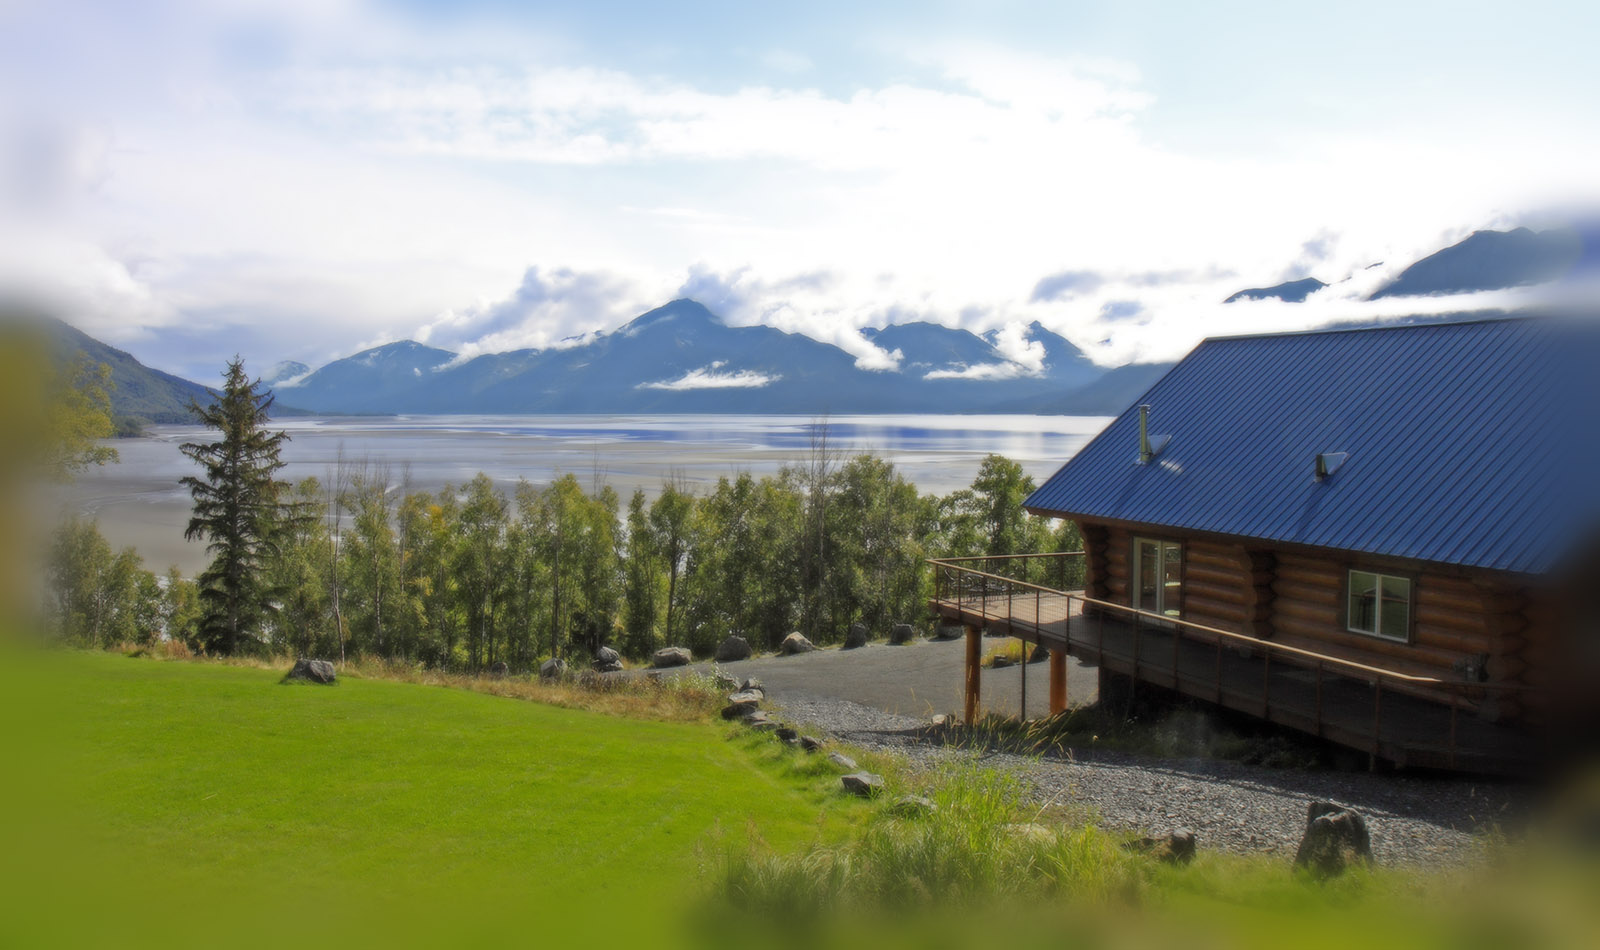 Turnagain View BnB is 30 minutes from Anchorage, Alaska